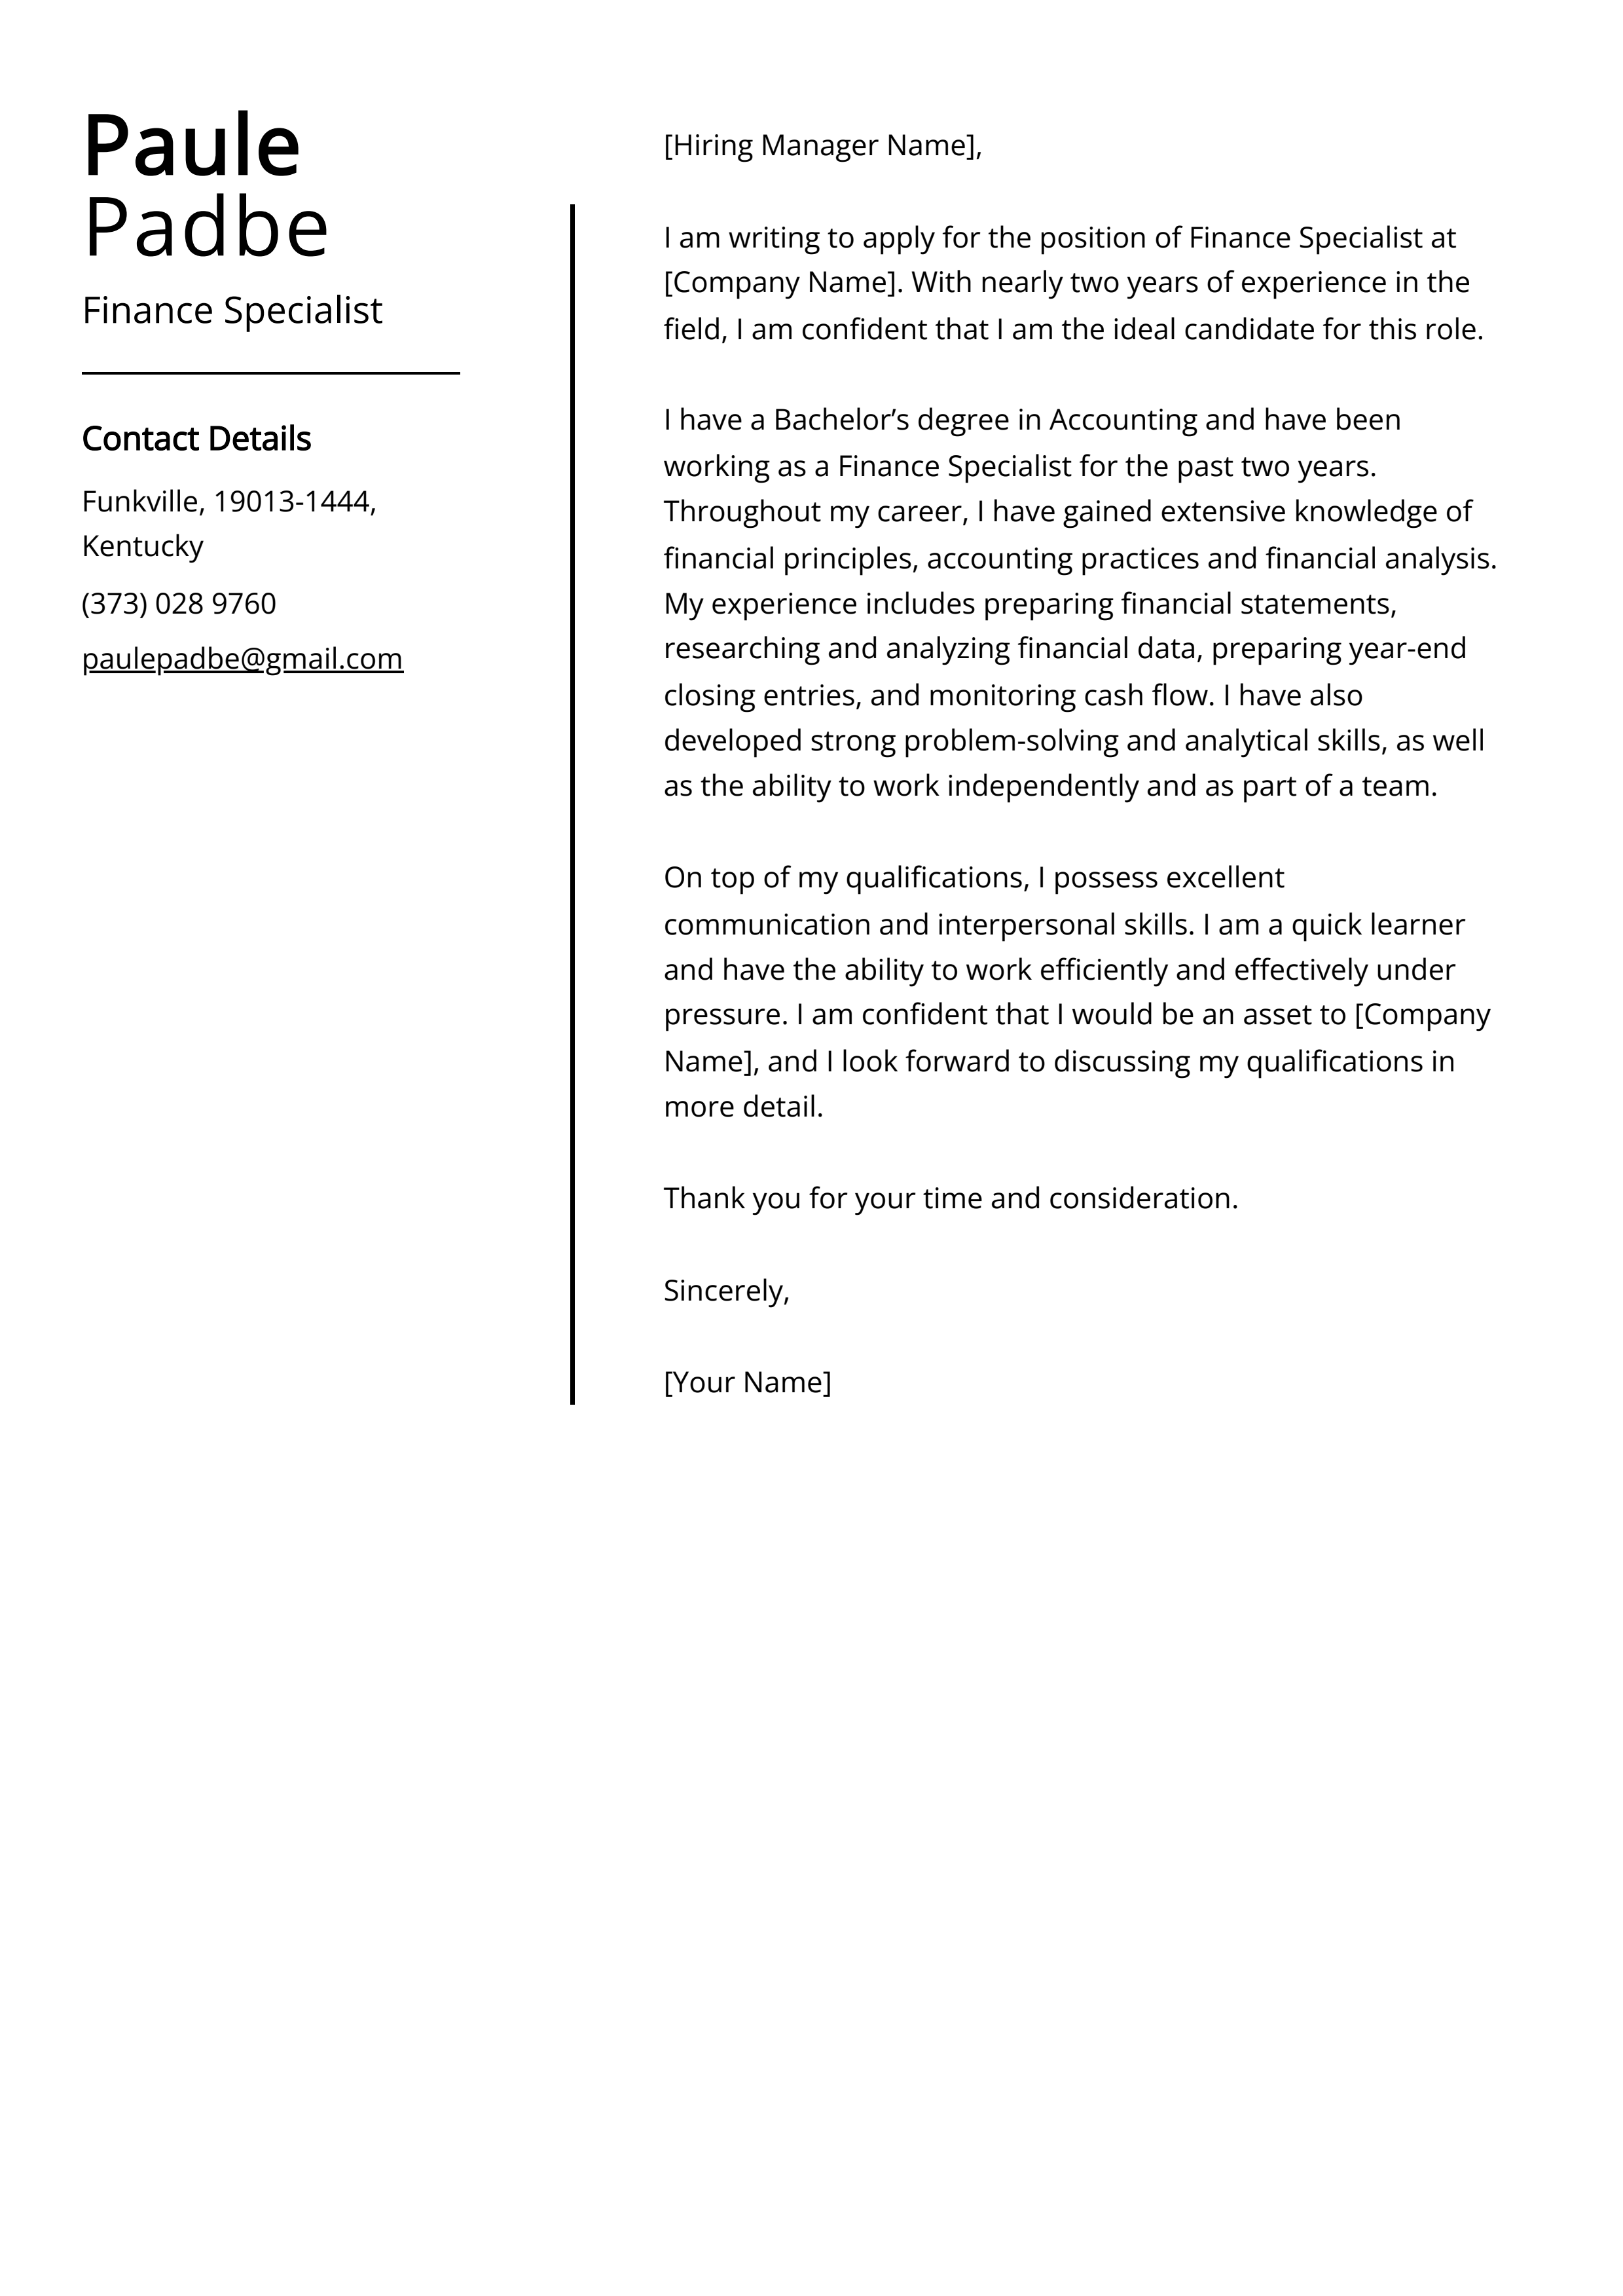 Finance Specialist Cover Letter Example